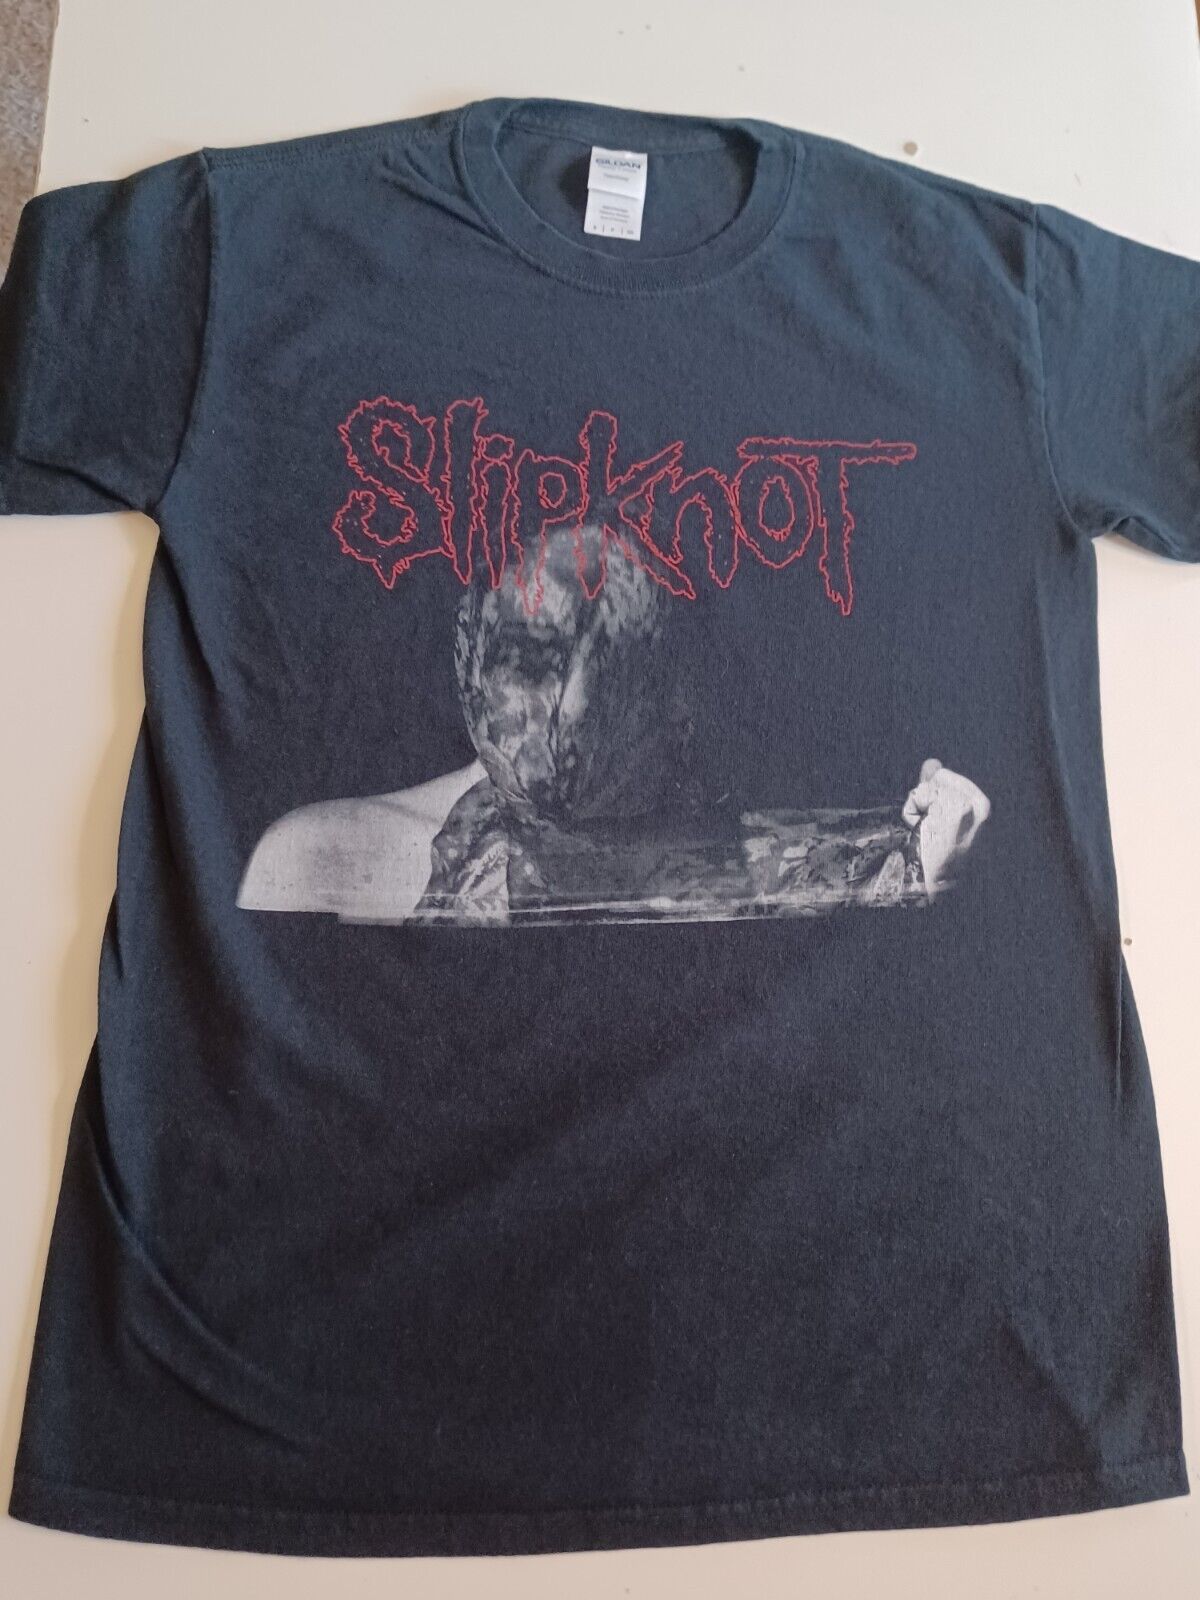 SLIPKNOT We Are Not Your Kind 2019 Tour Shirt - Small